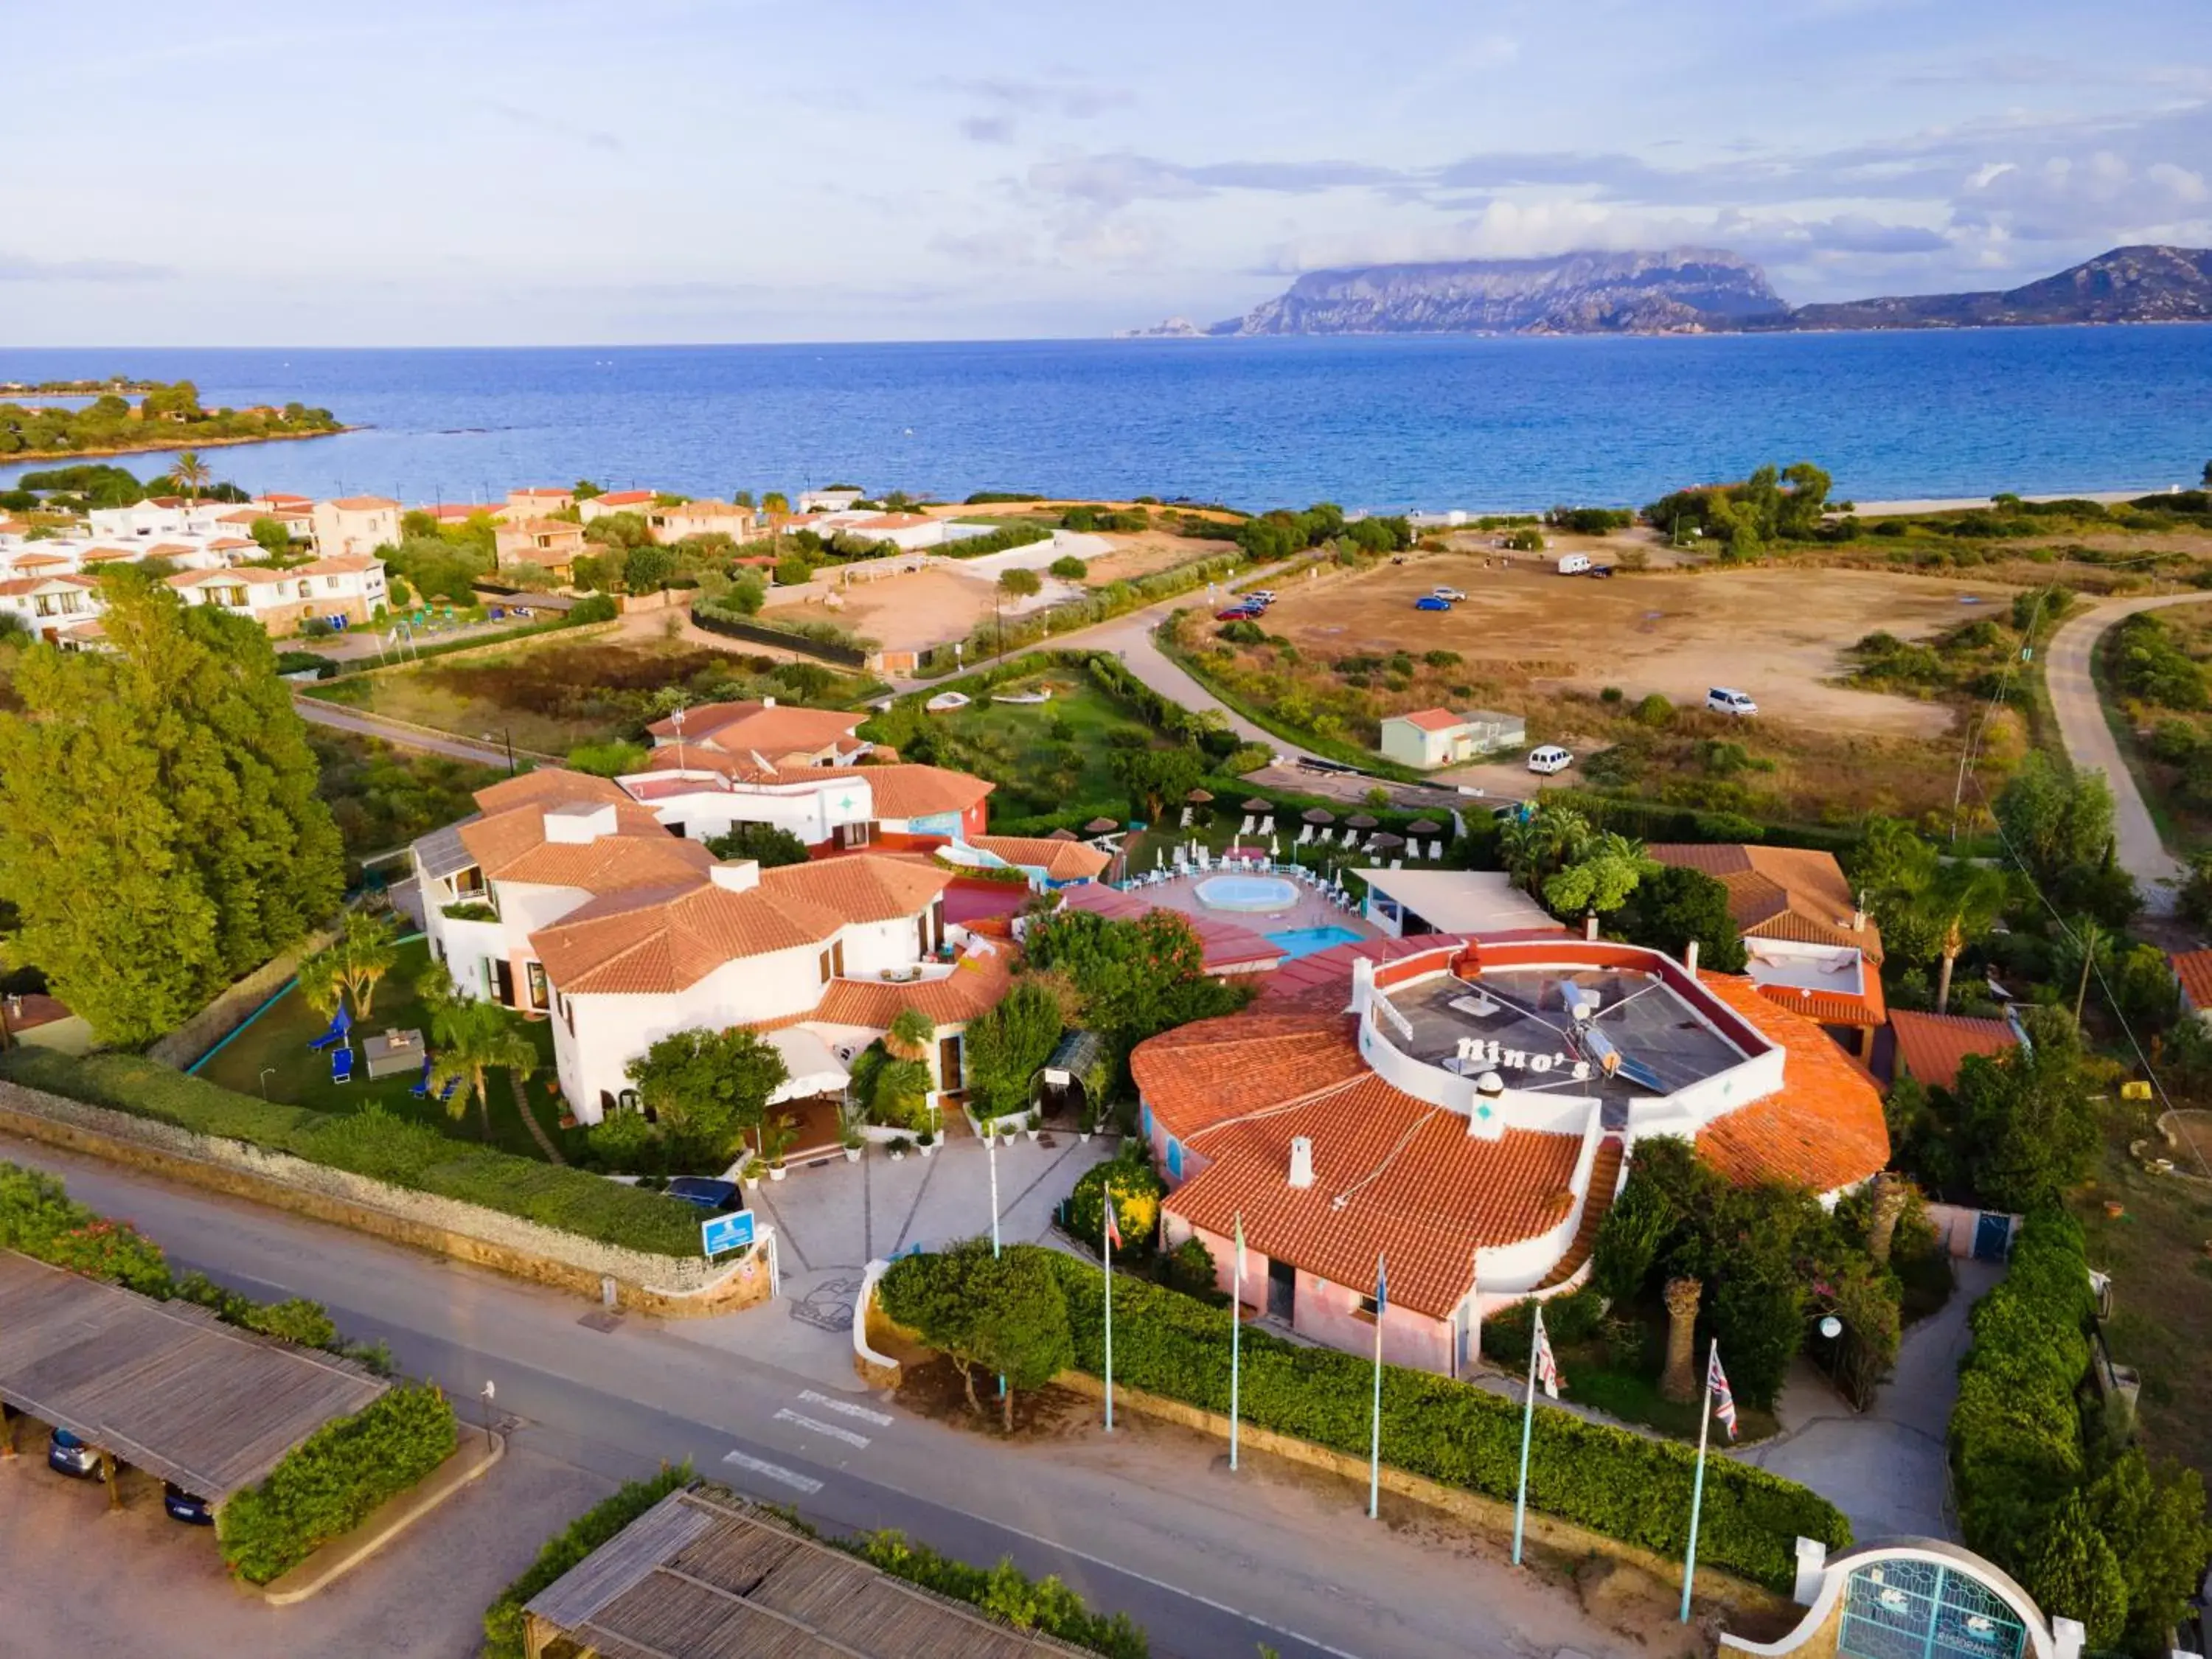 Bird's-eye View in Hotel Stefania Boutique Hotel by the Beach